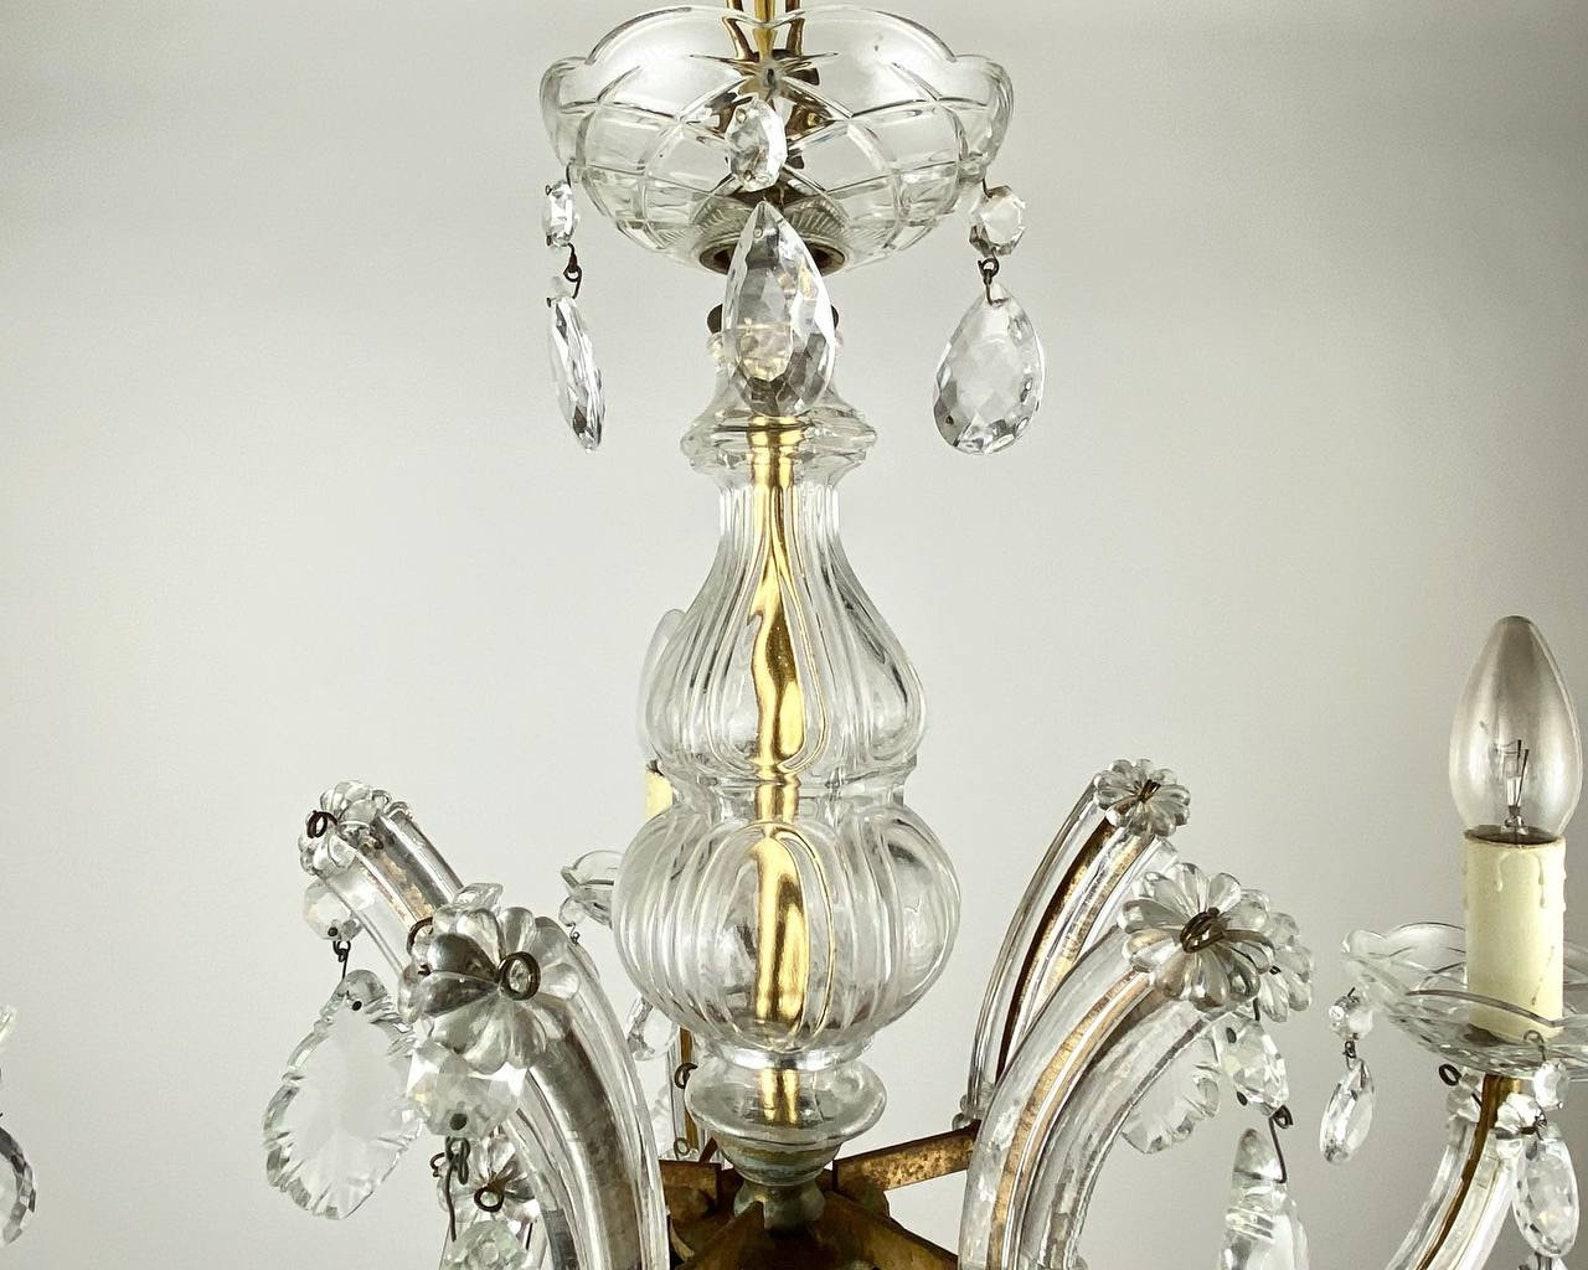 Metal Vintage Maria Theresa Style Chandelier  Crystal Chandelier With 5 Lights